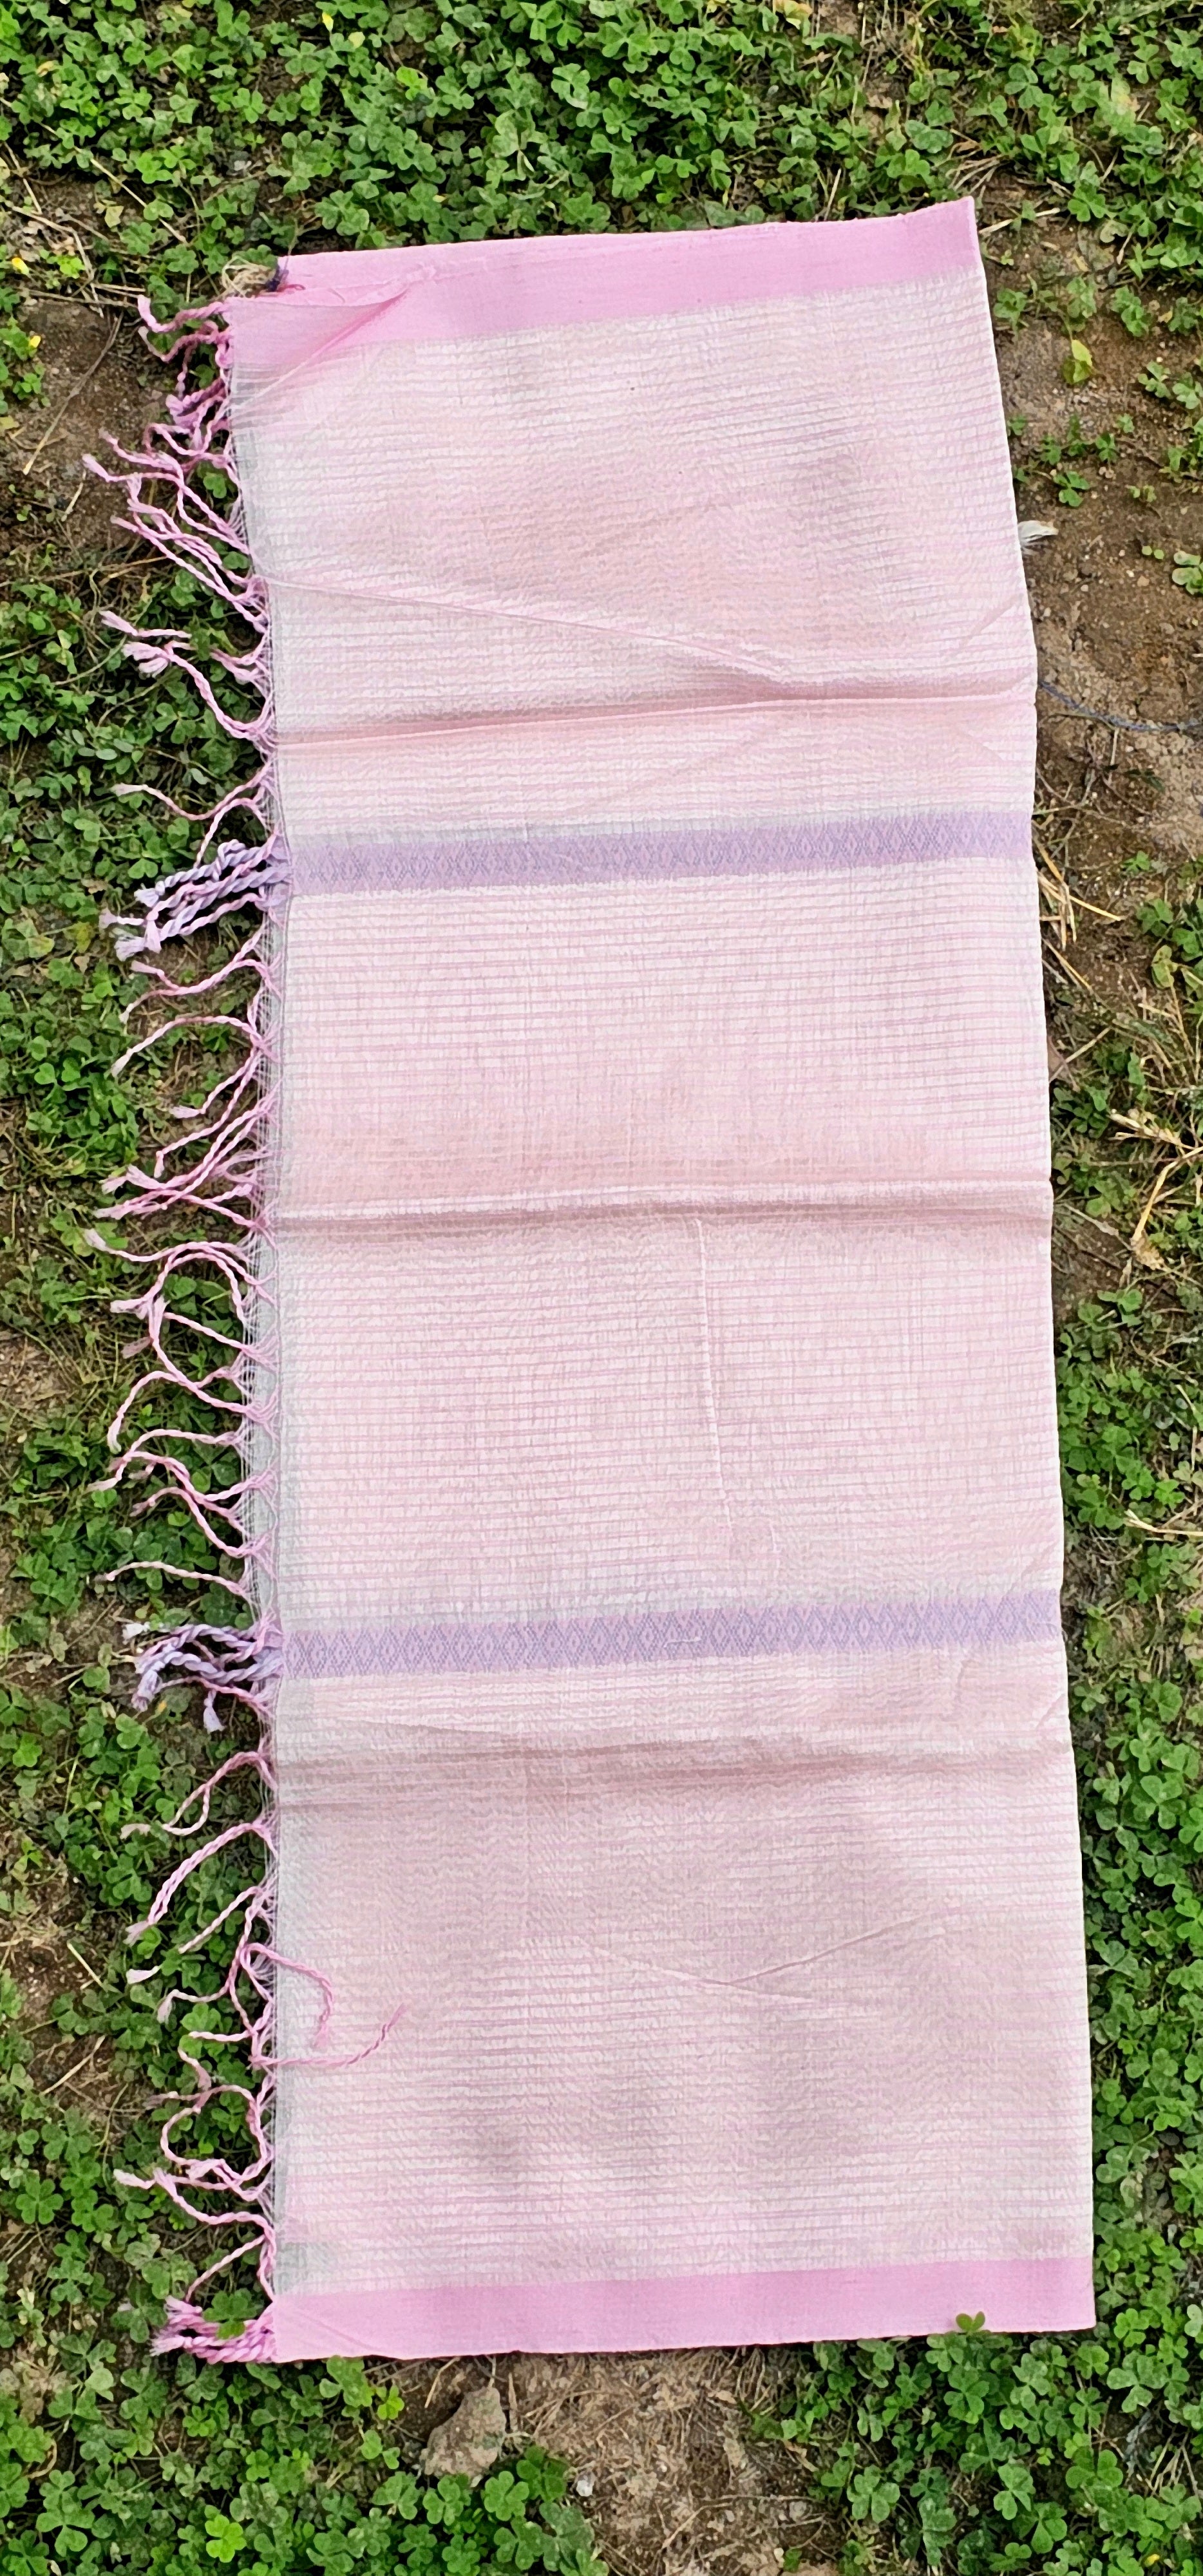 Stole with Warp Stripes and Woven Borders.